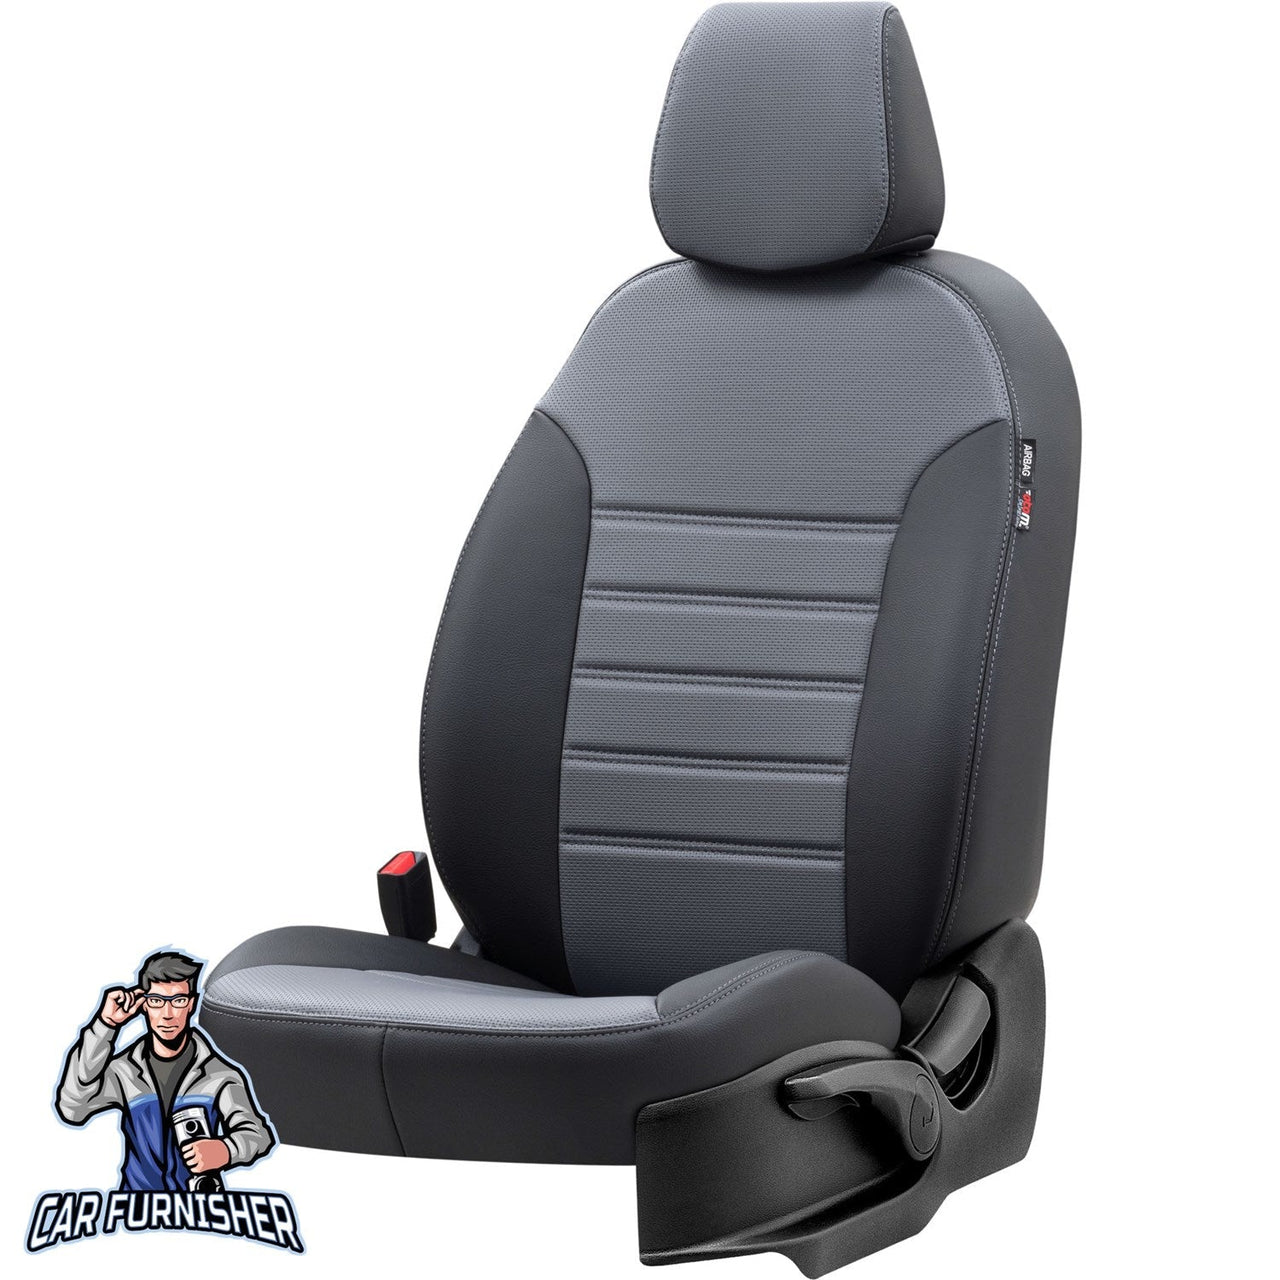 Mitsubishi Space Star Seat Cover New York Leather Design Smoked Black Leather